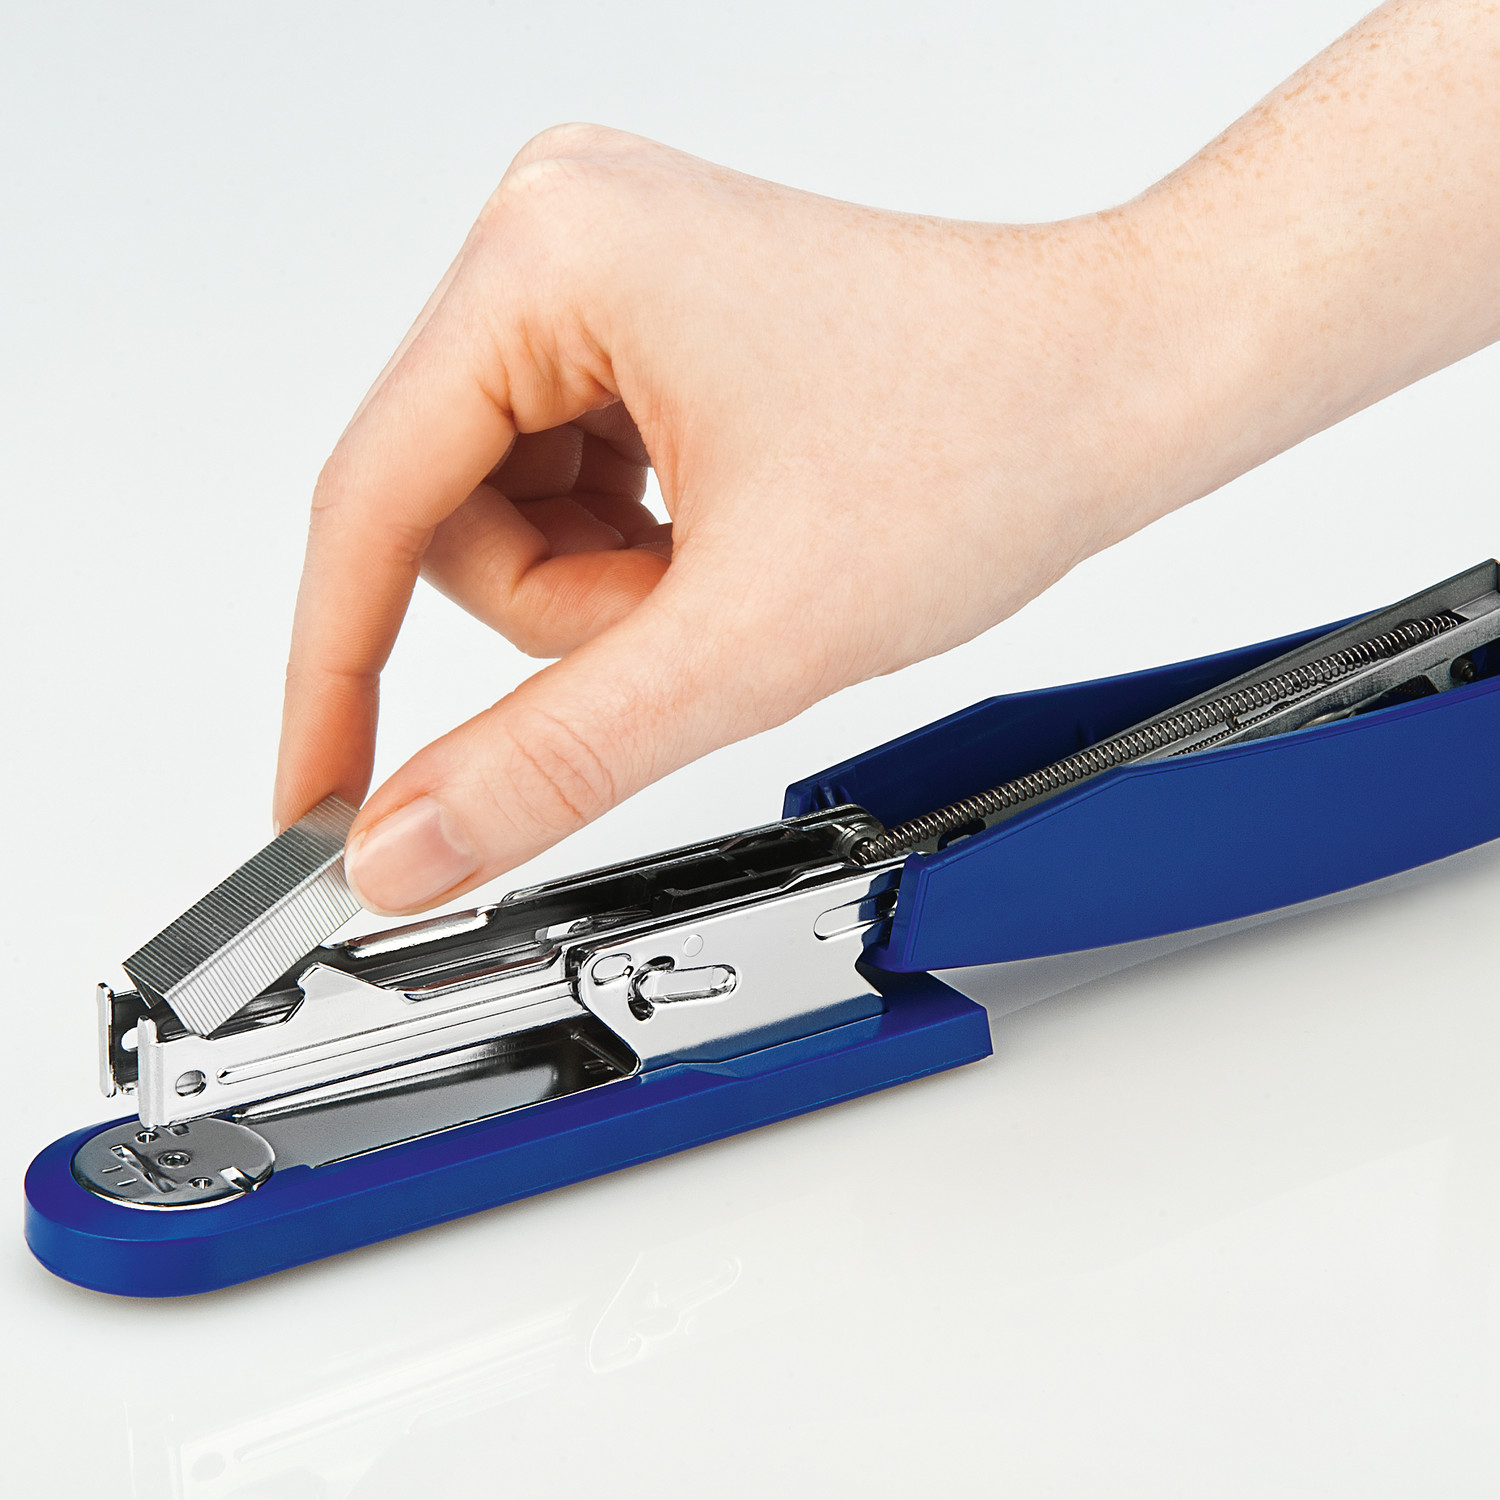 After tipping up the top of the stapler the staples can be inserted into the magazine.